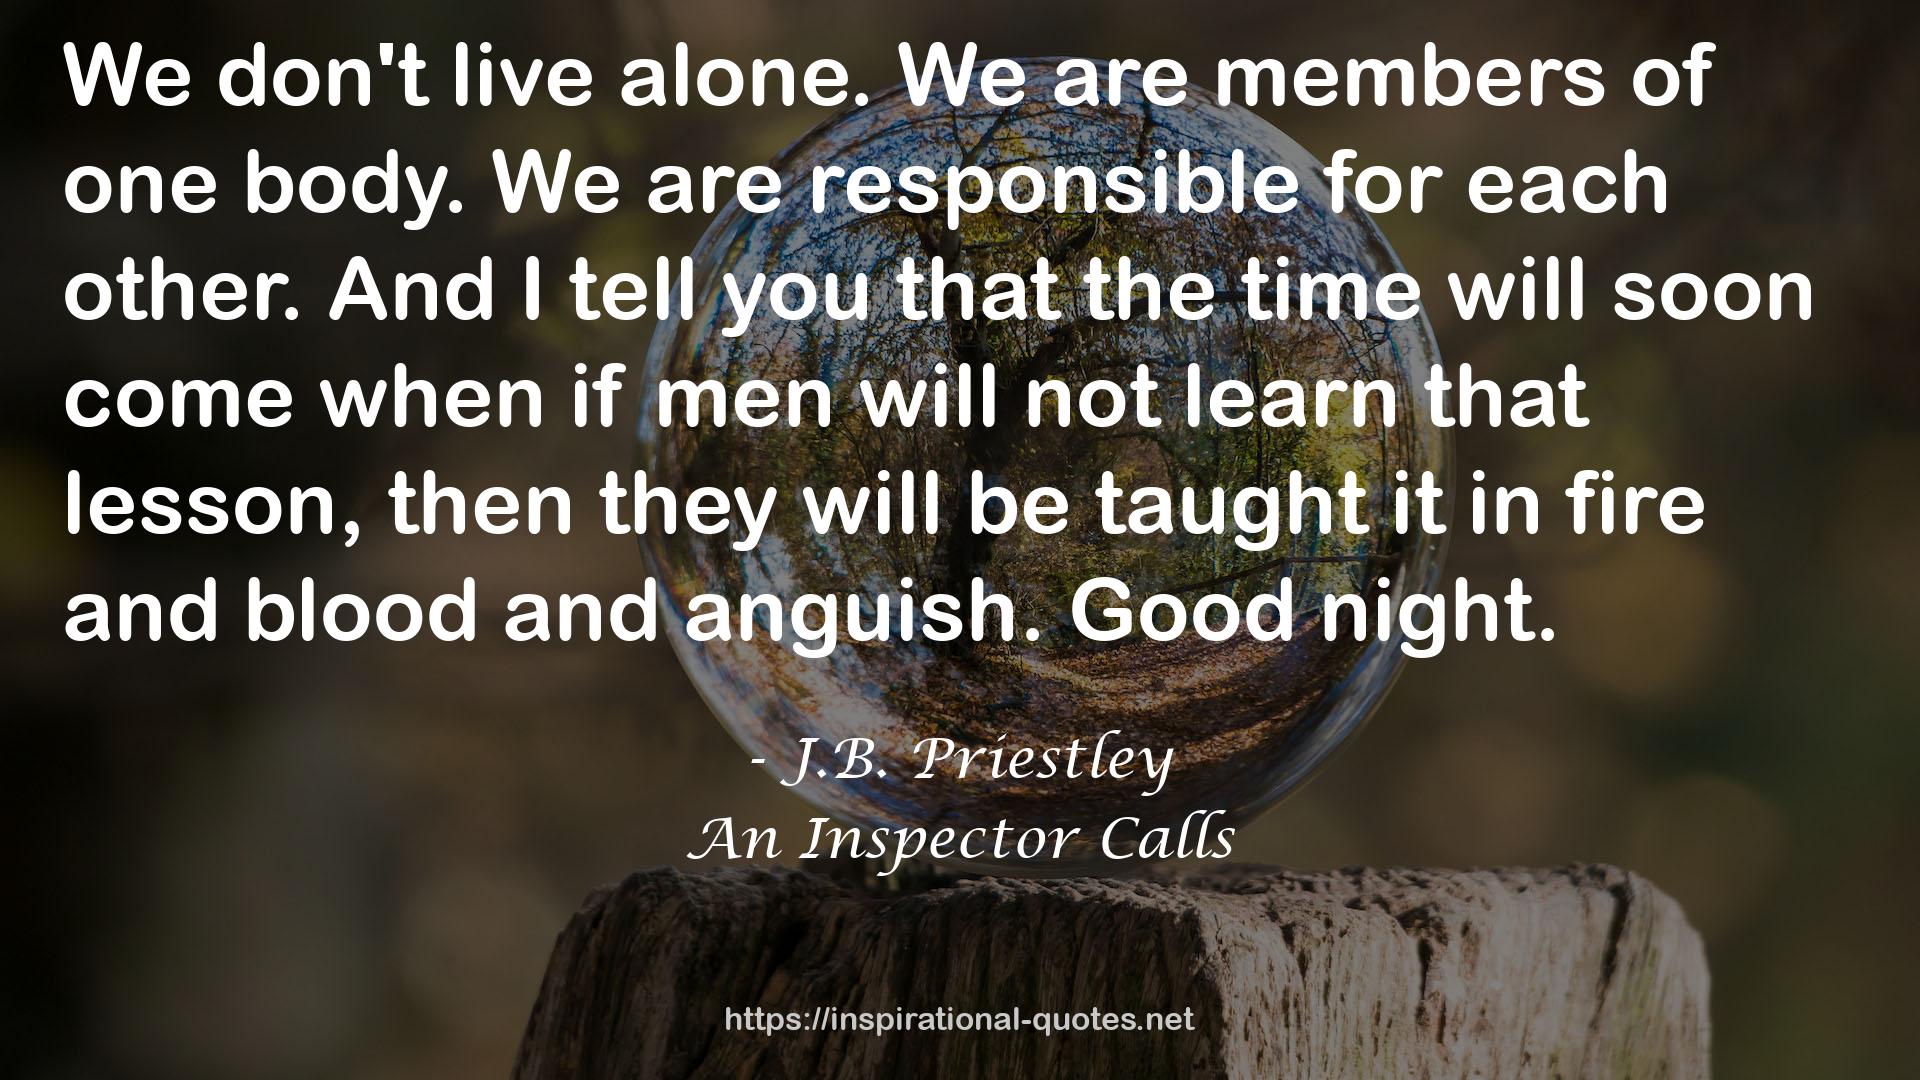 An Inspector Calls QUOTES